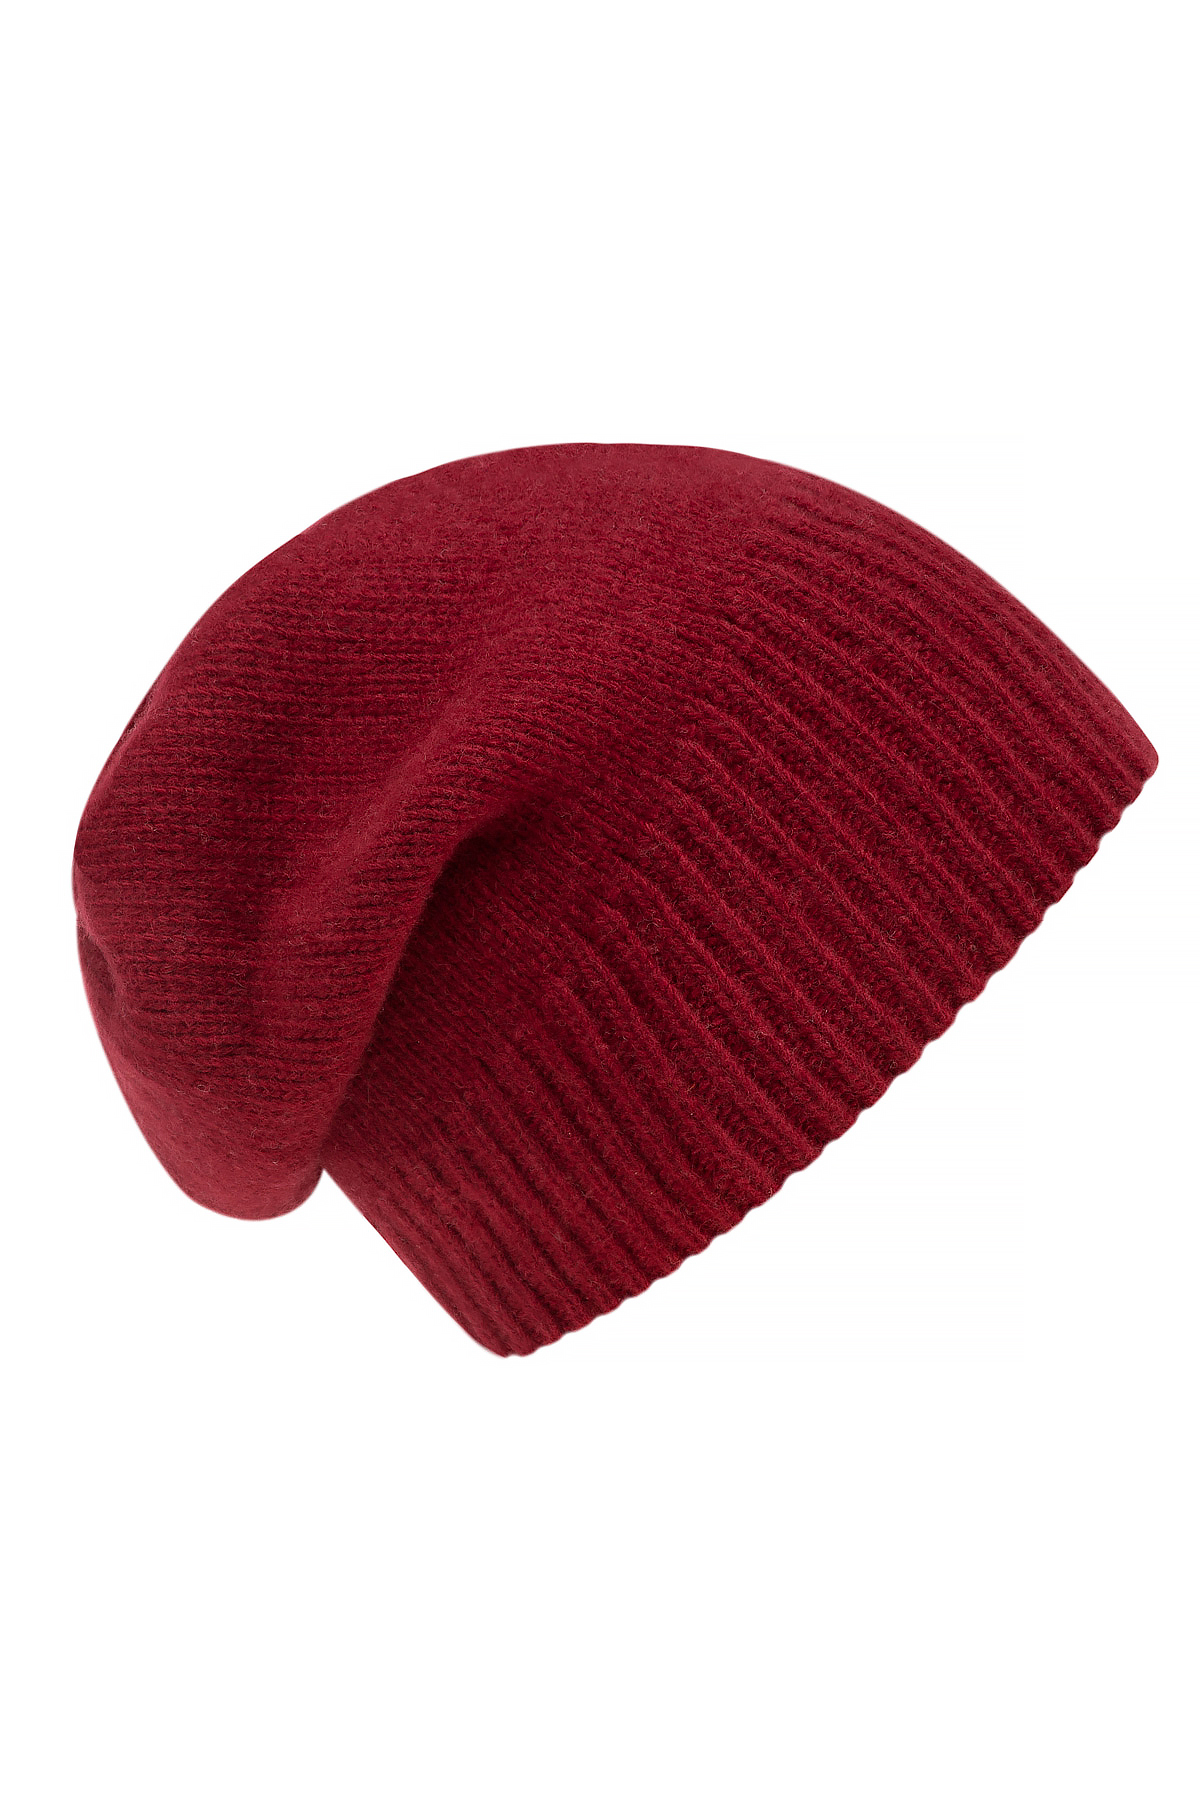 Image of a red hat